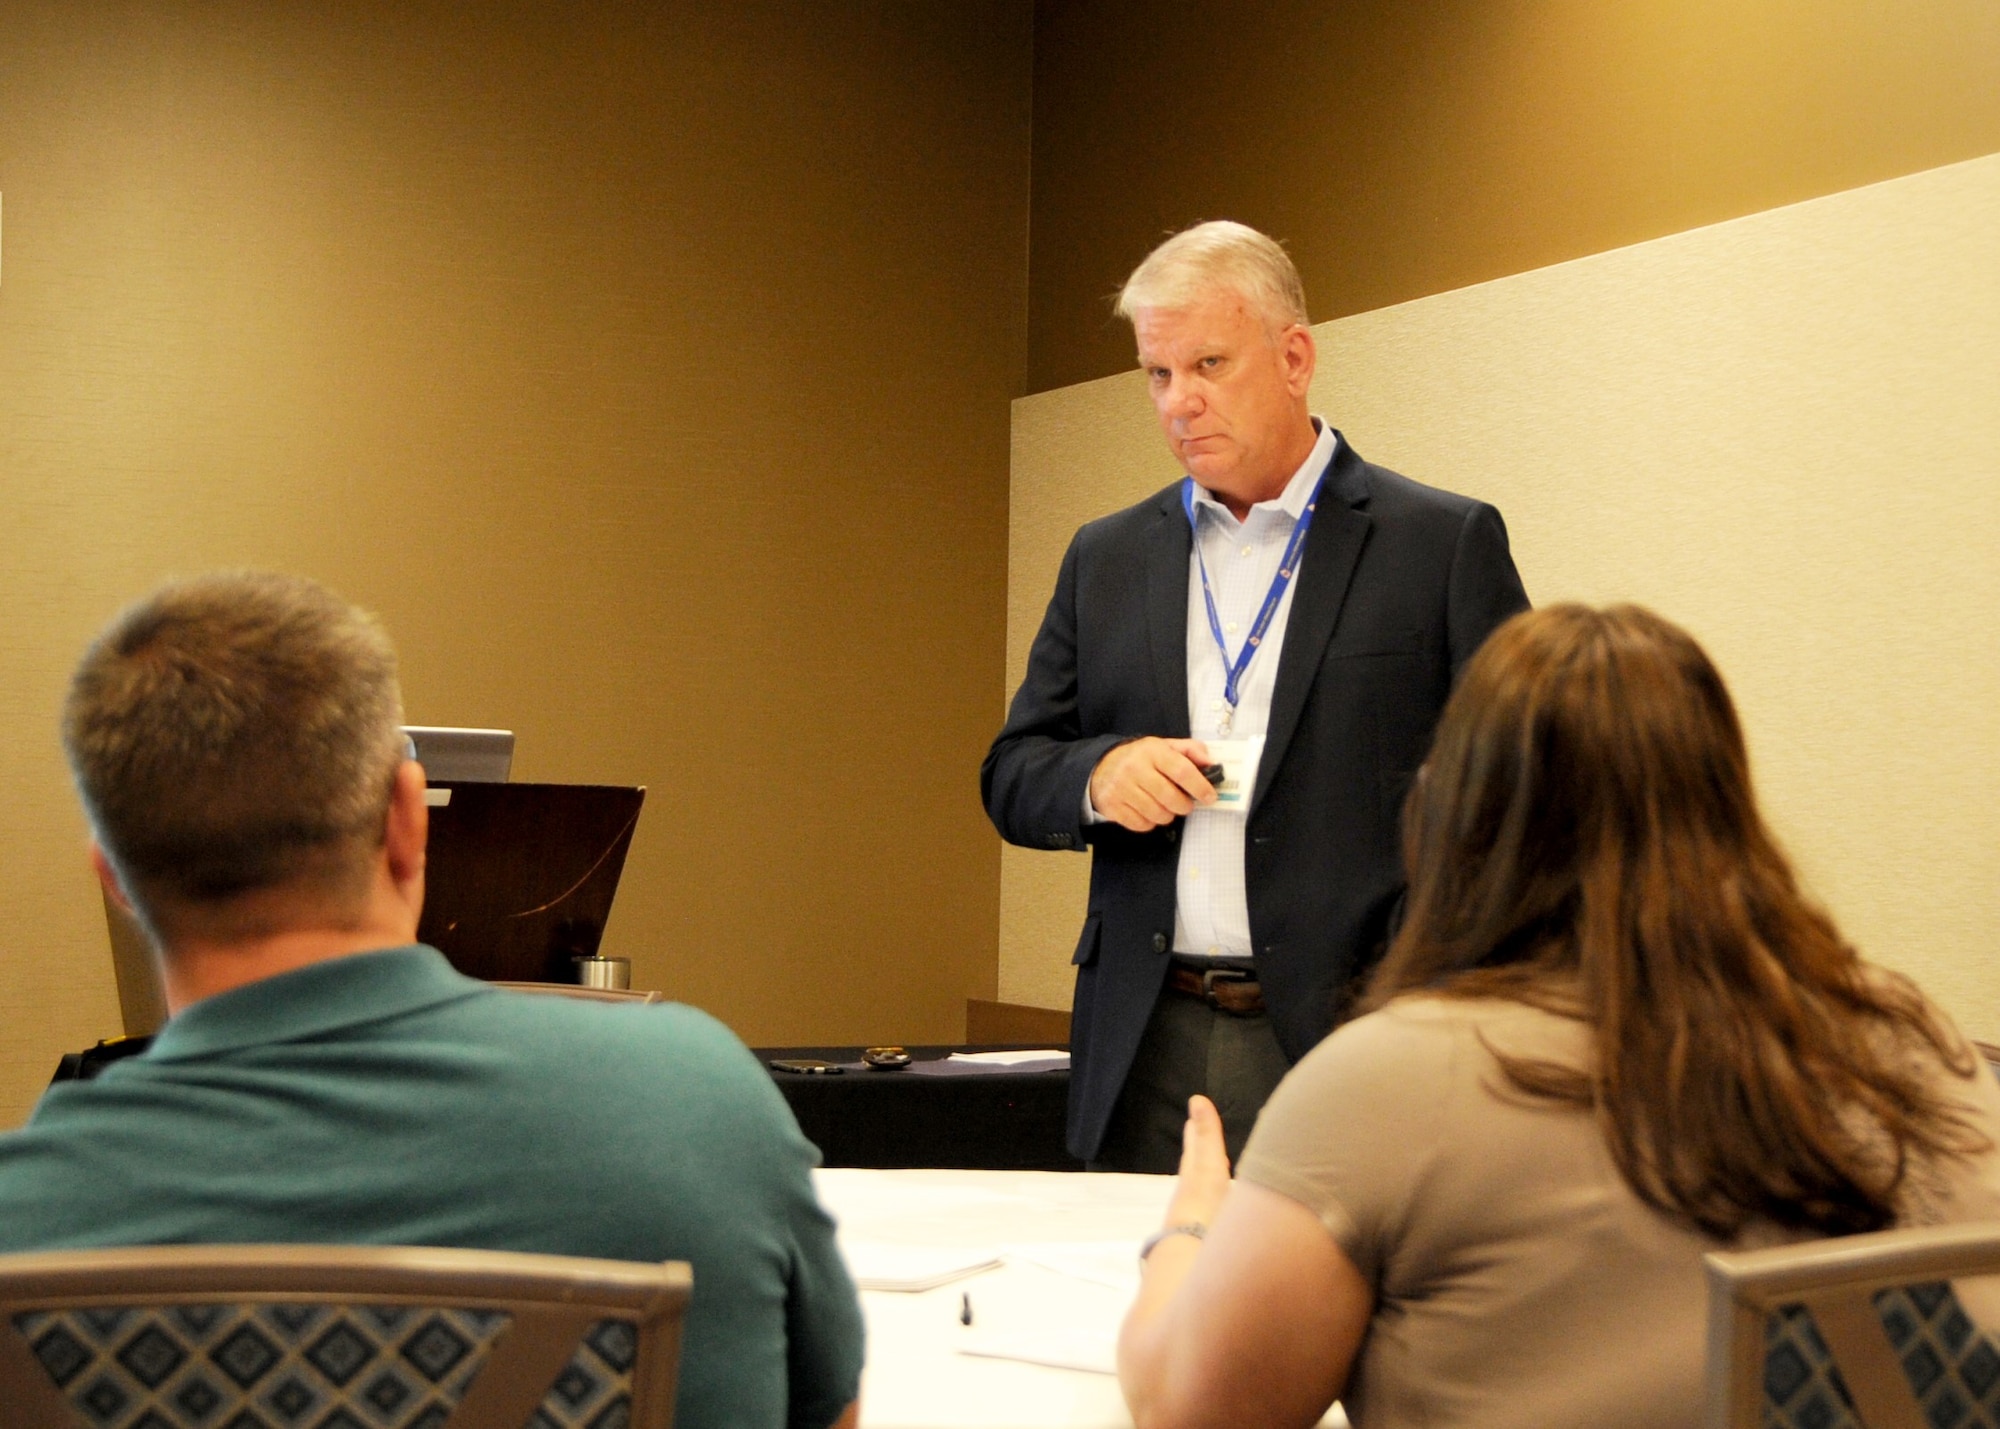 Col. Don Wren, 910th Mission Support Group commander at Youngstown Air Reserve Base, Ohio, teaches Reservists and their guests about how to write an effective resume for a federal job during theYellow Ribbon Reintegration Program event in St. Louis, Missouri, July 19-21, 2019. (U.S. Air Force photo by Tech. Sgt. Lauren Gleason)